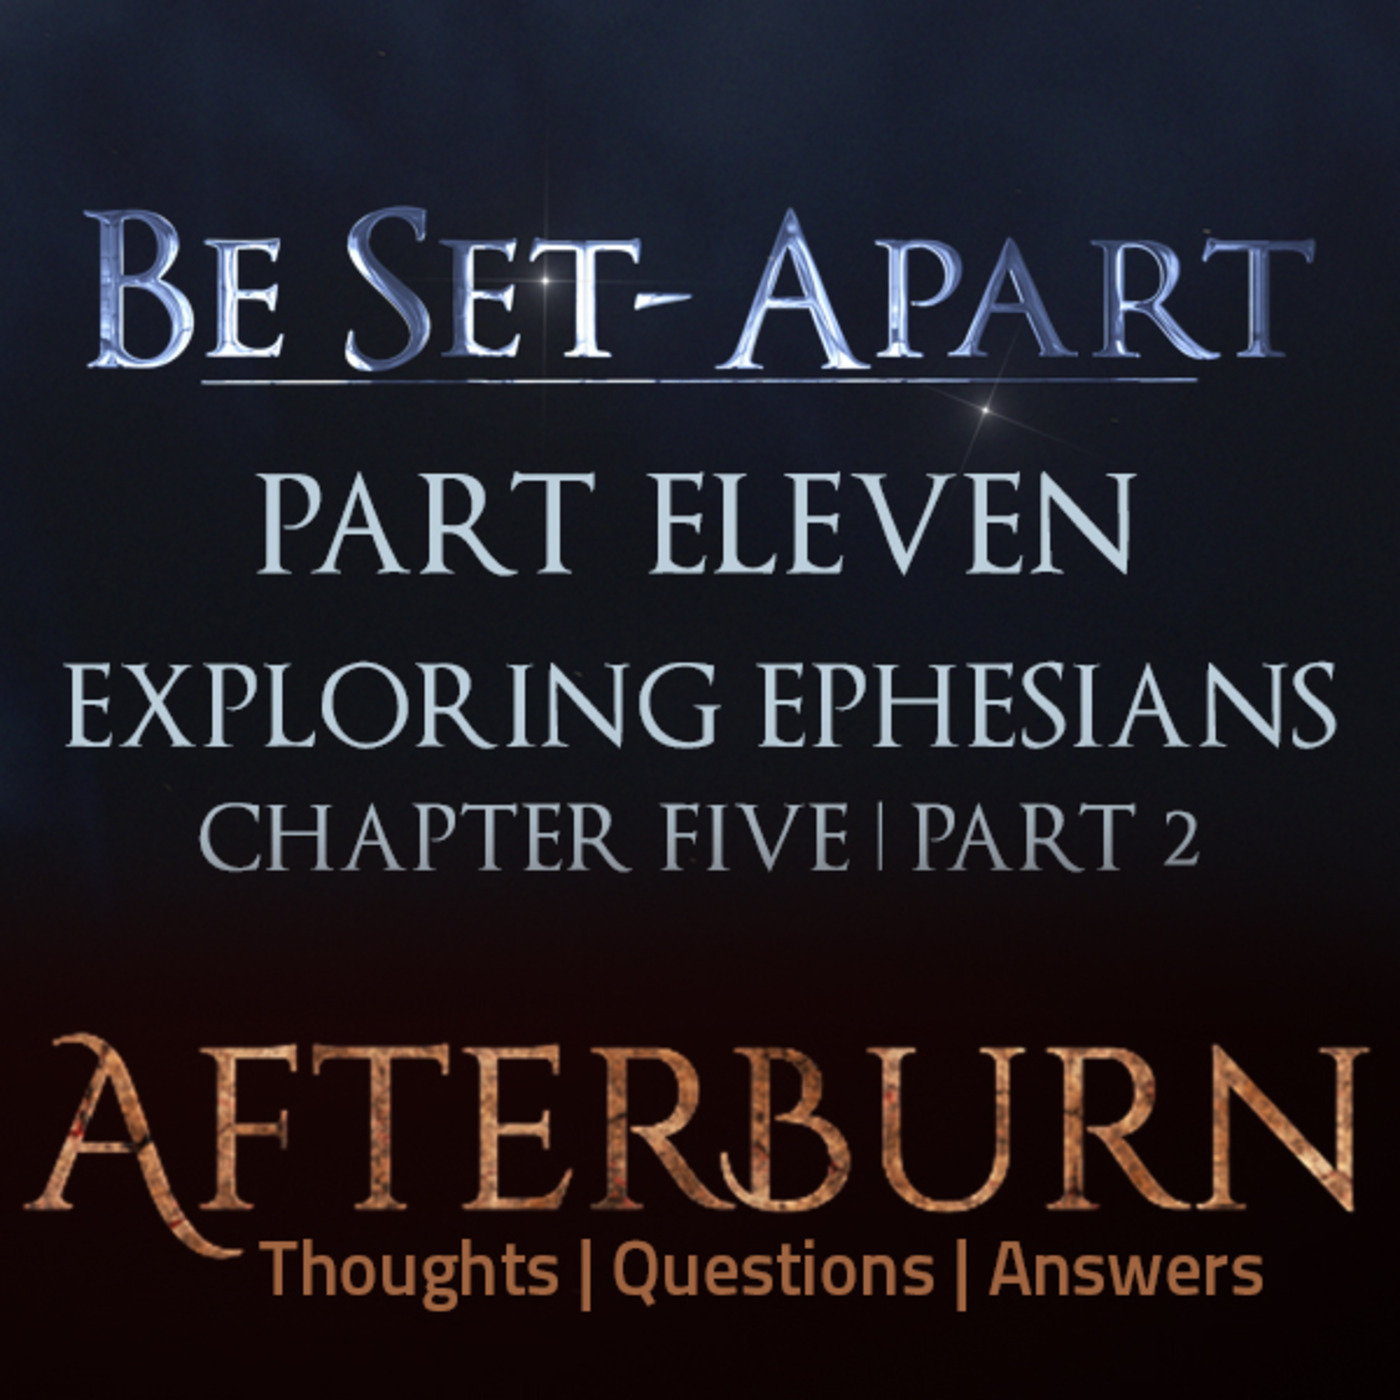 Episode 781: Afterburn | Thoughts, Q&A on Be Set-Apart | Part Eleven | Exploring Ephesians Chapter Five | Part 2